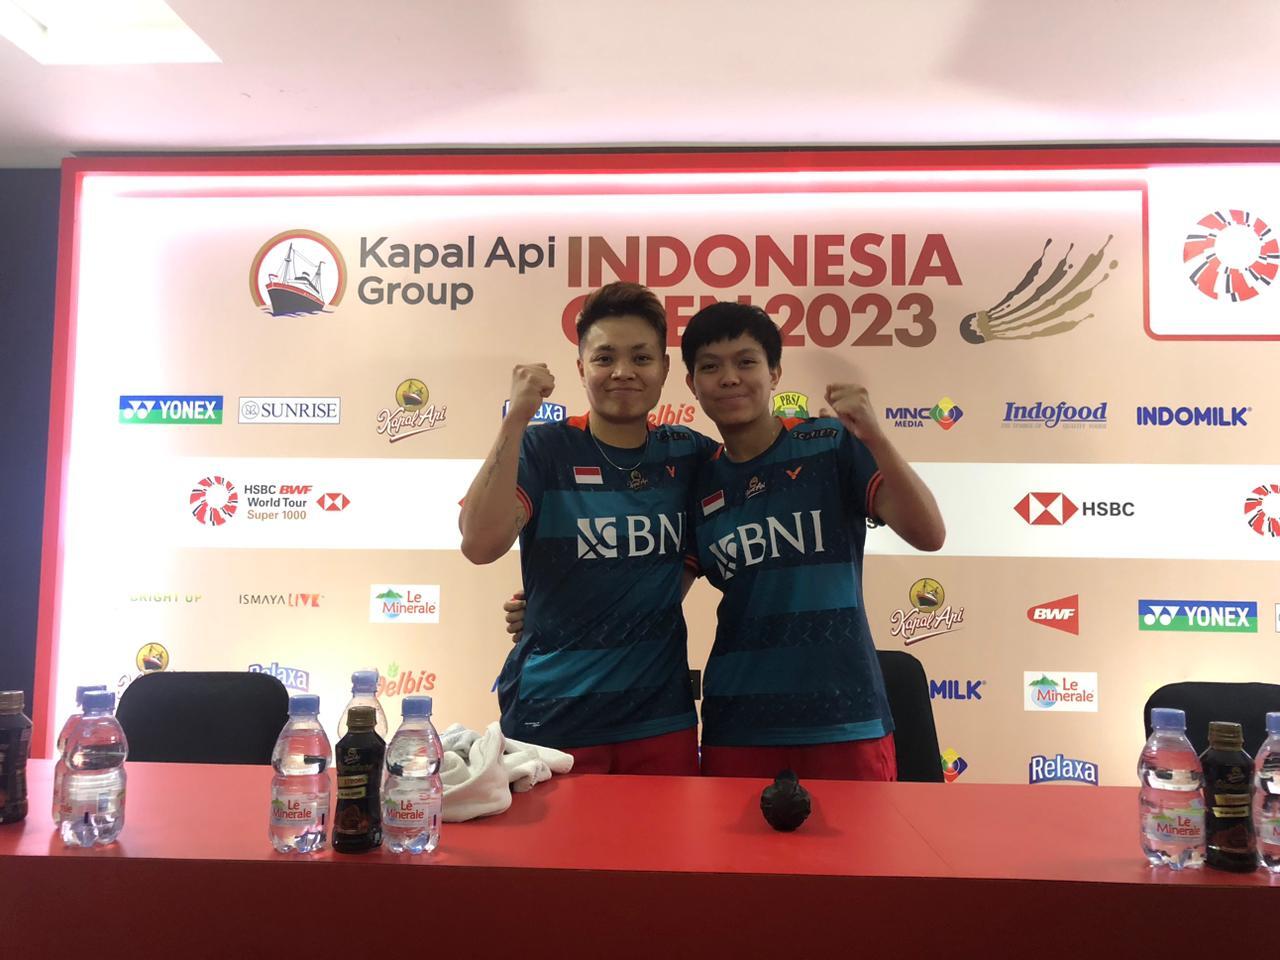 &#91;Highlight&#93; Indonesia Open 2023 Day 2